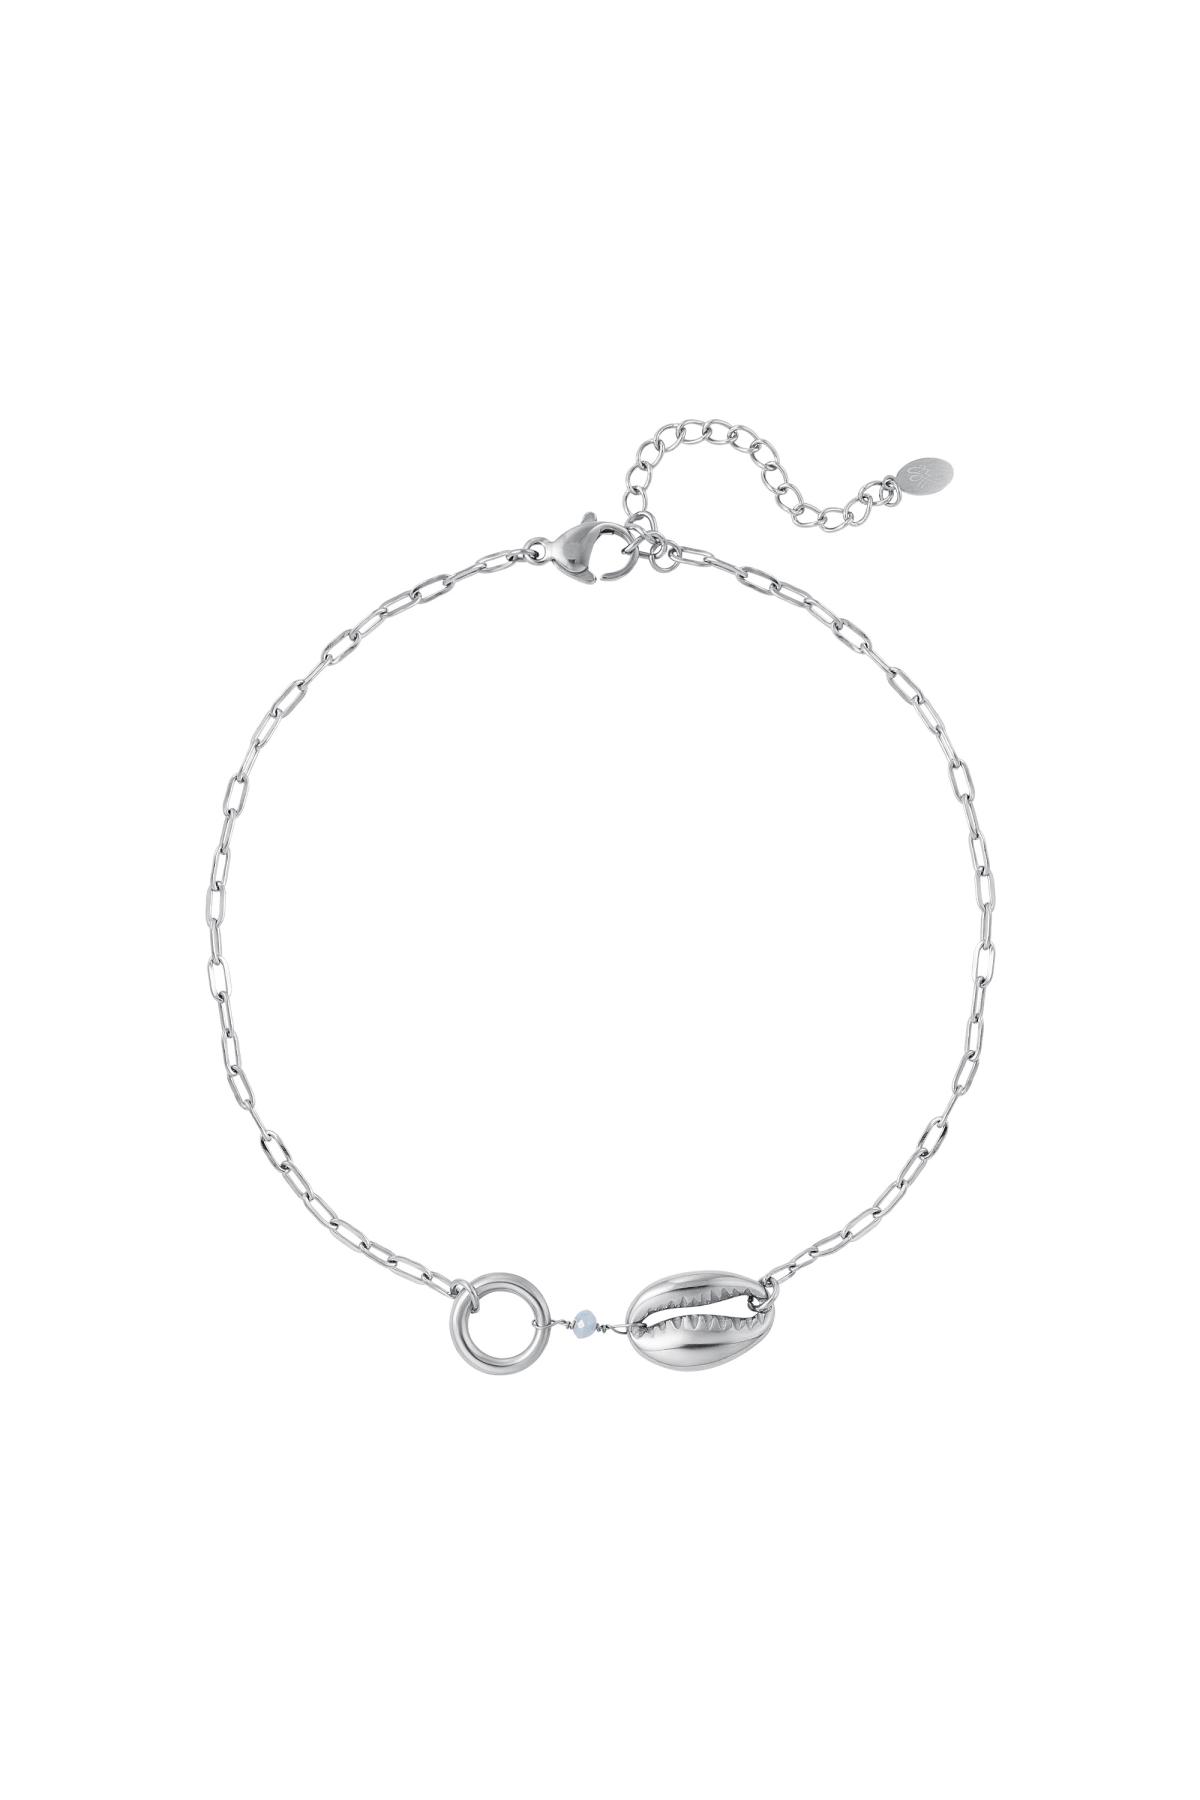 Shell anklet - beach collection